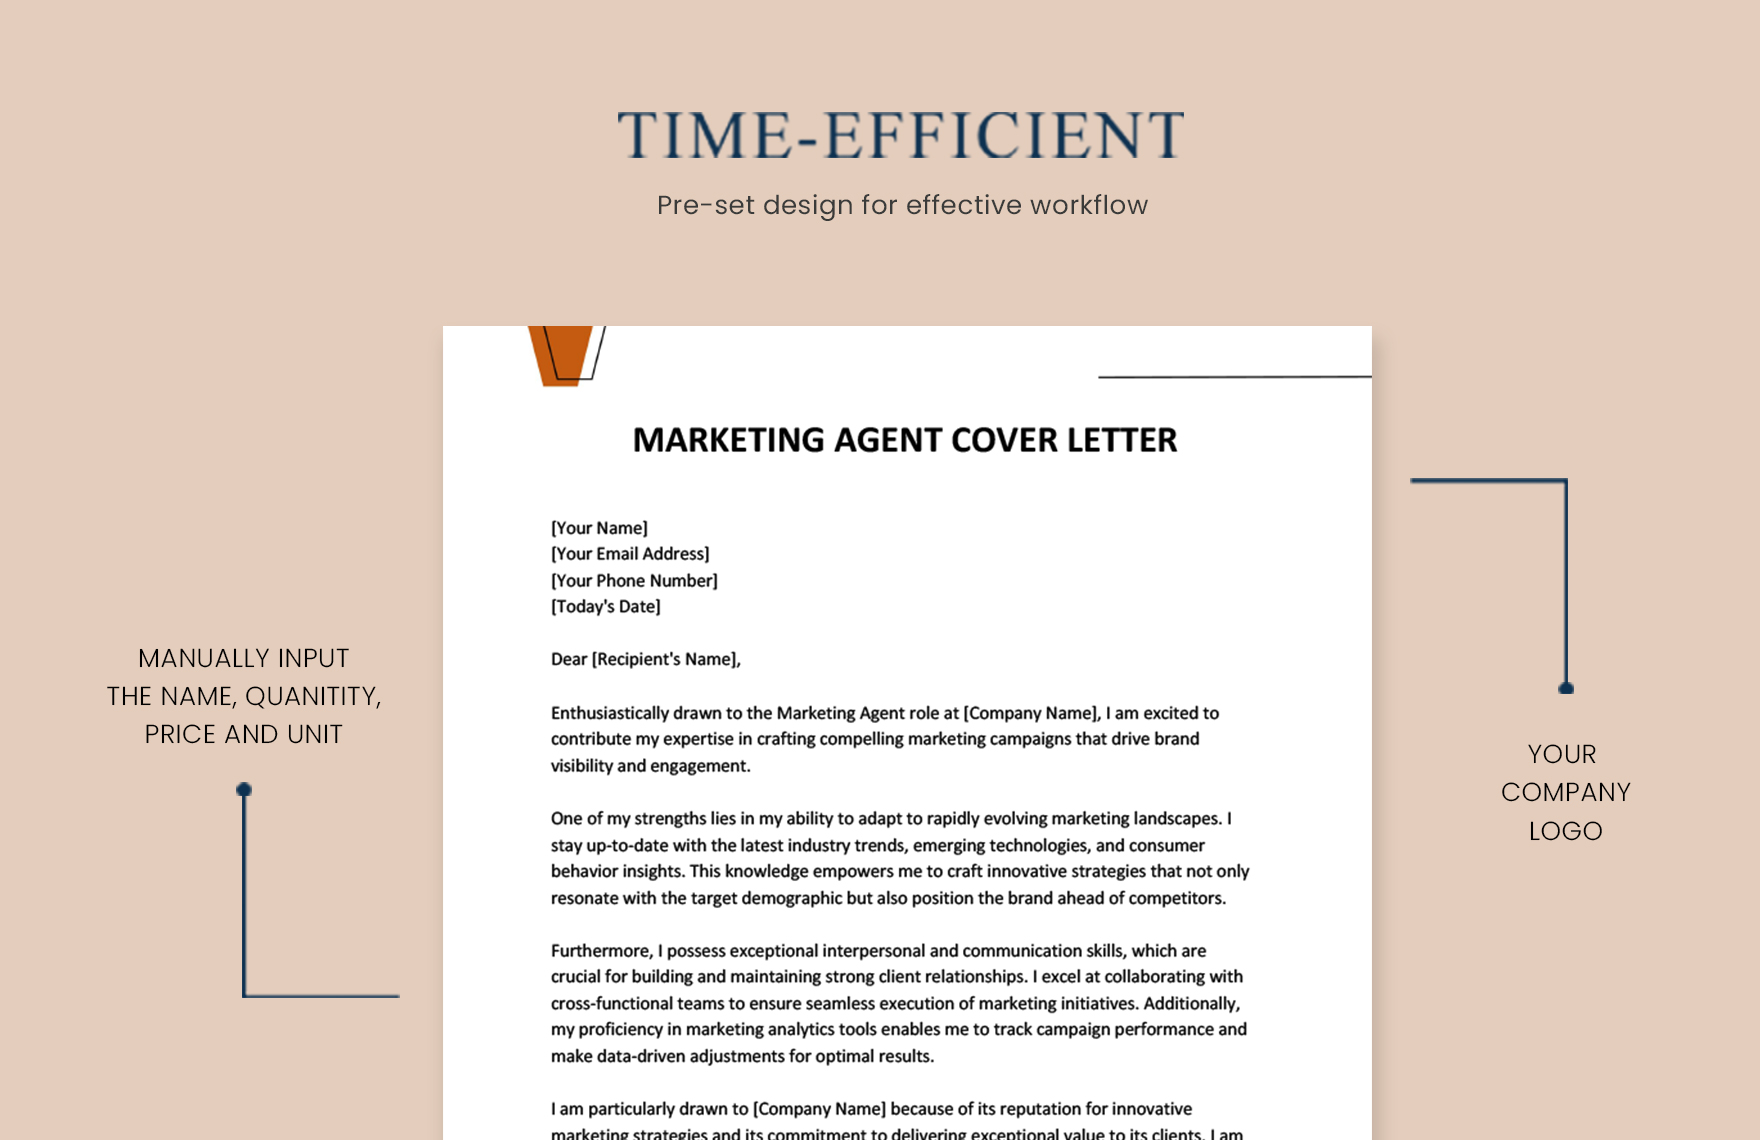 Marketing Agent Cover Letter